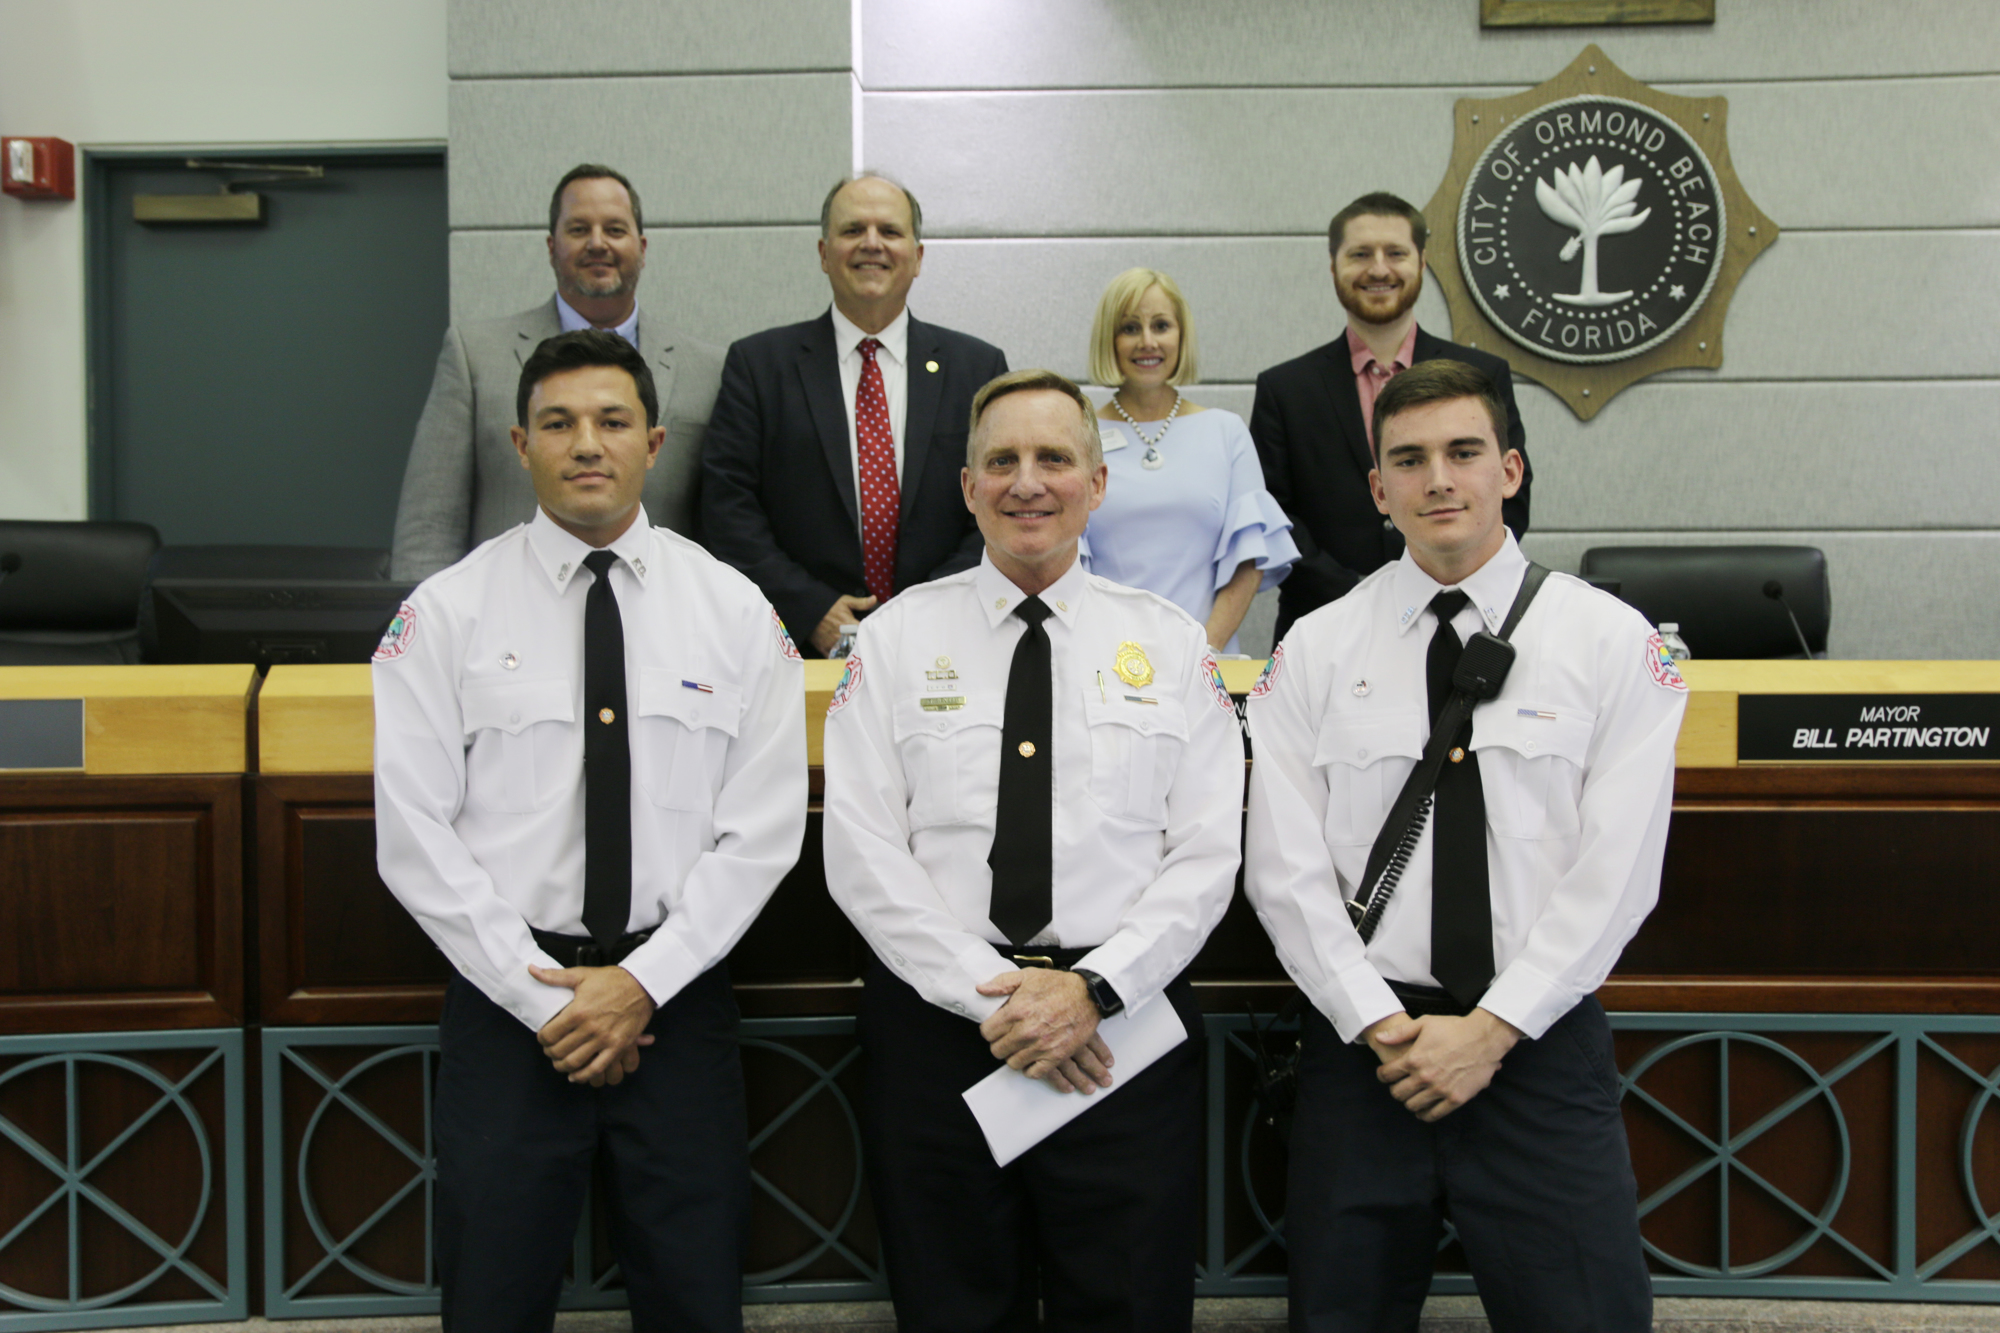 Shown are Firefighter Frank Autorino, Fire Chief Richard Sievers and Firefighter Garrett Fiske at a City Commission meeting. Courtesy photo